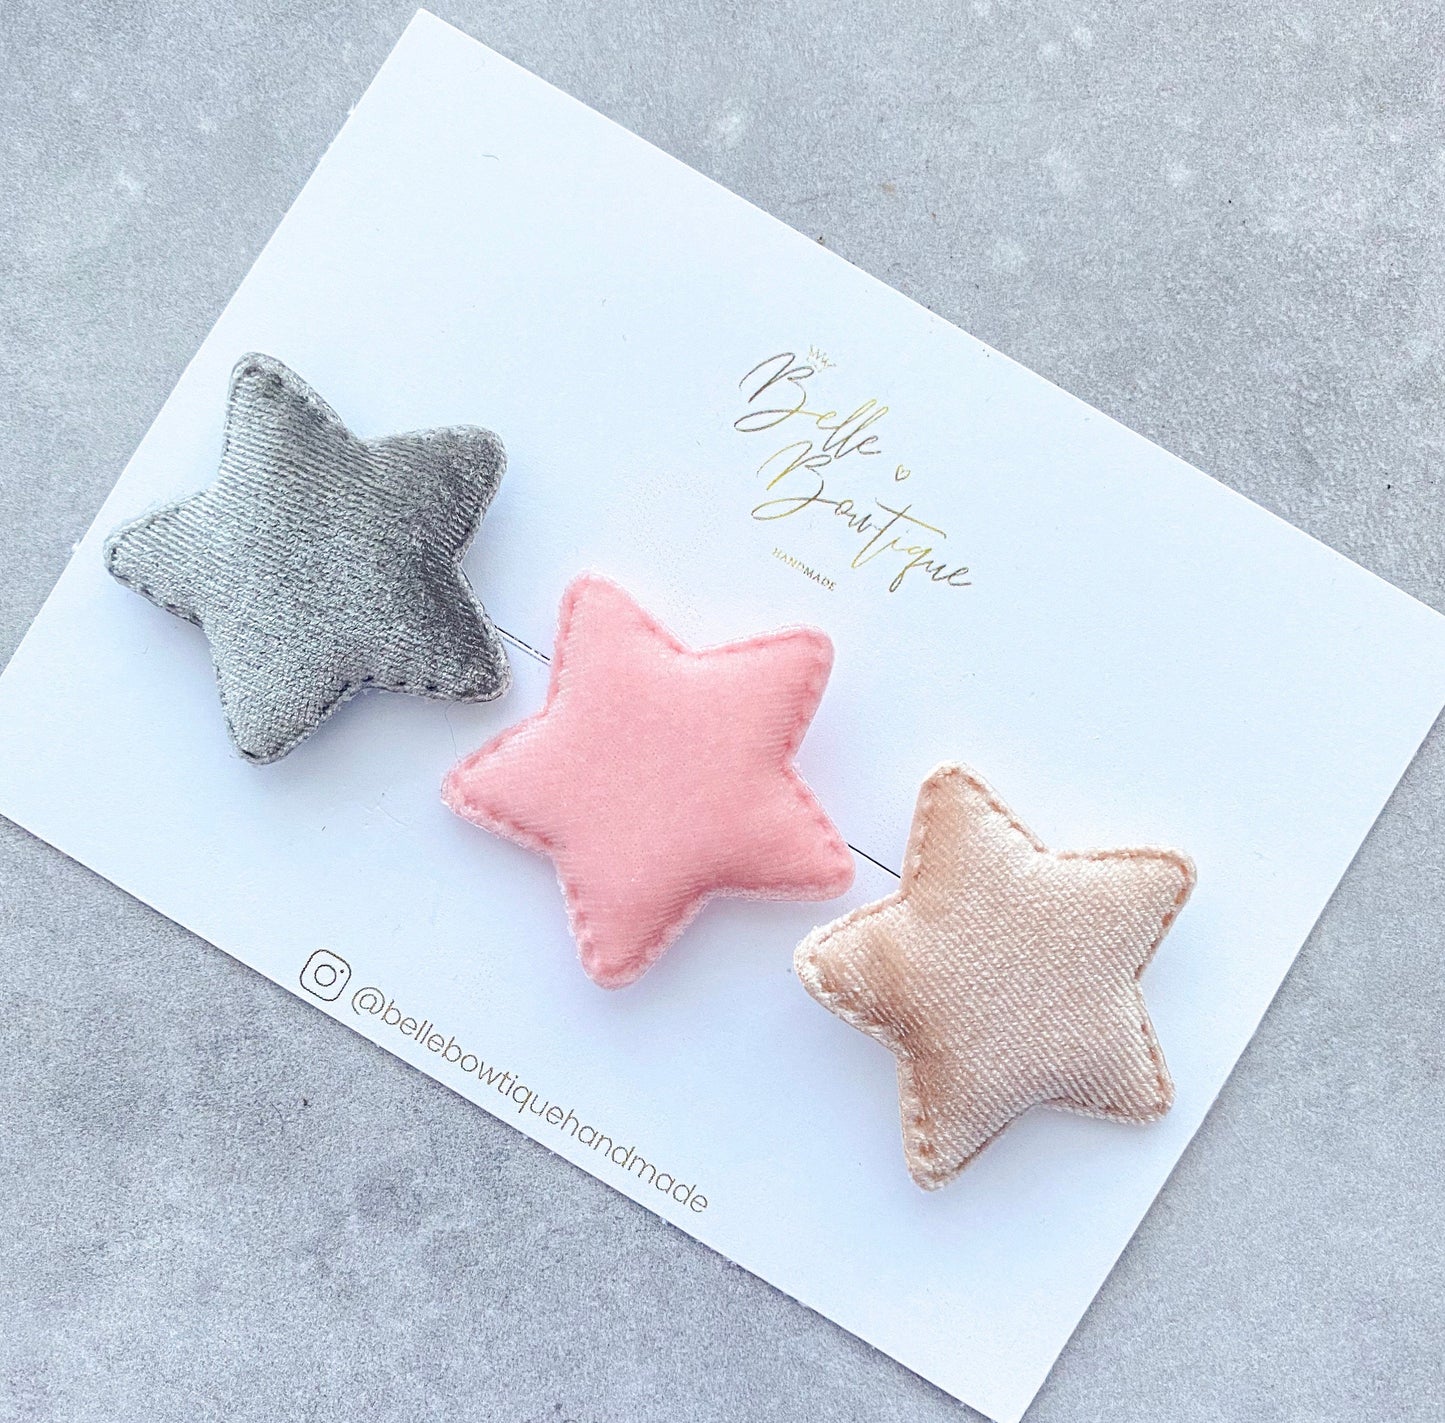 Star fringe clips - small clips - pink clips - Hair clips for girls - small clips - toddler hair clips - baby hair clips - grey